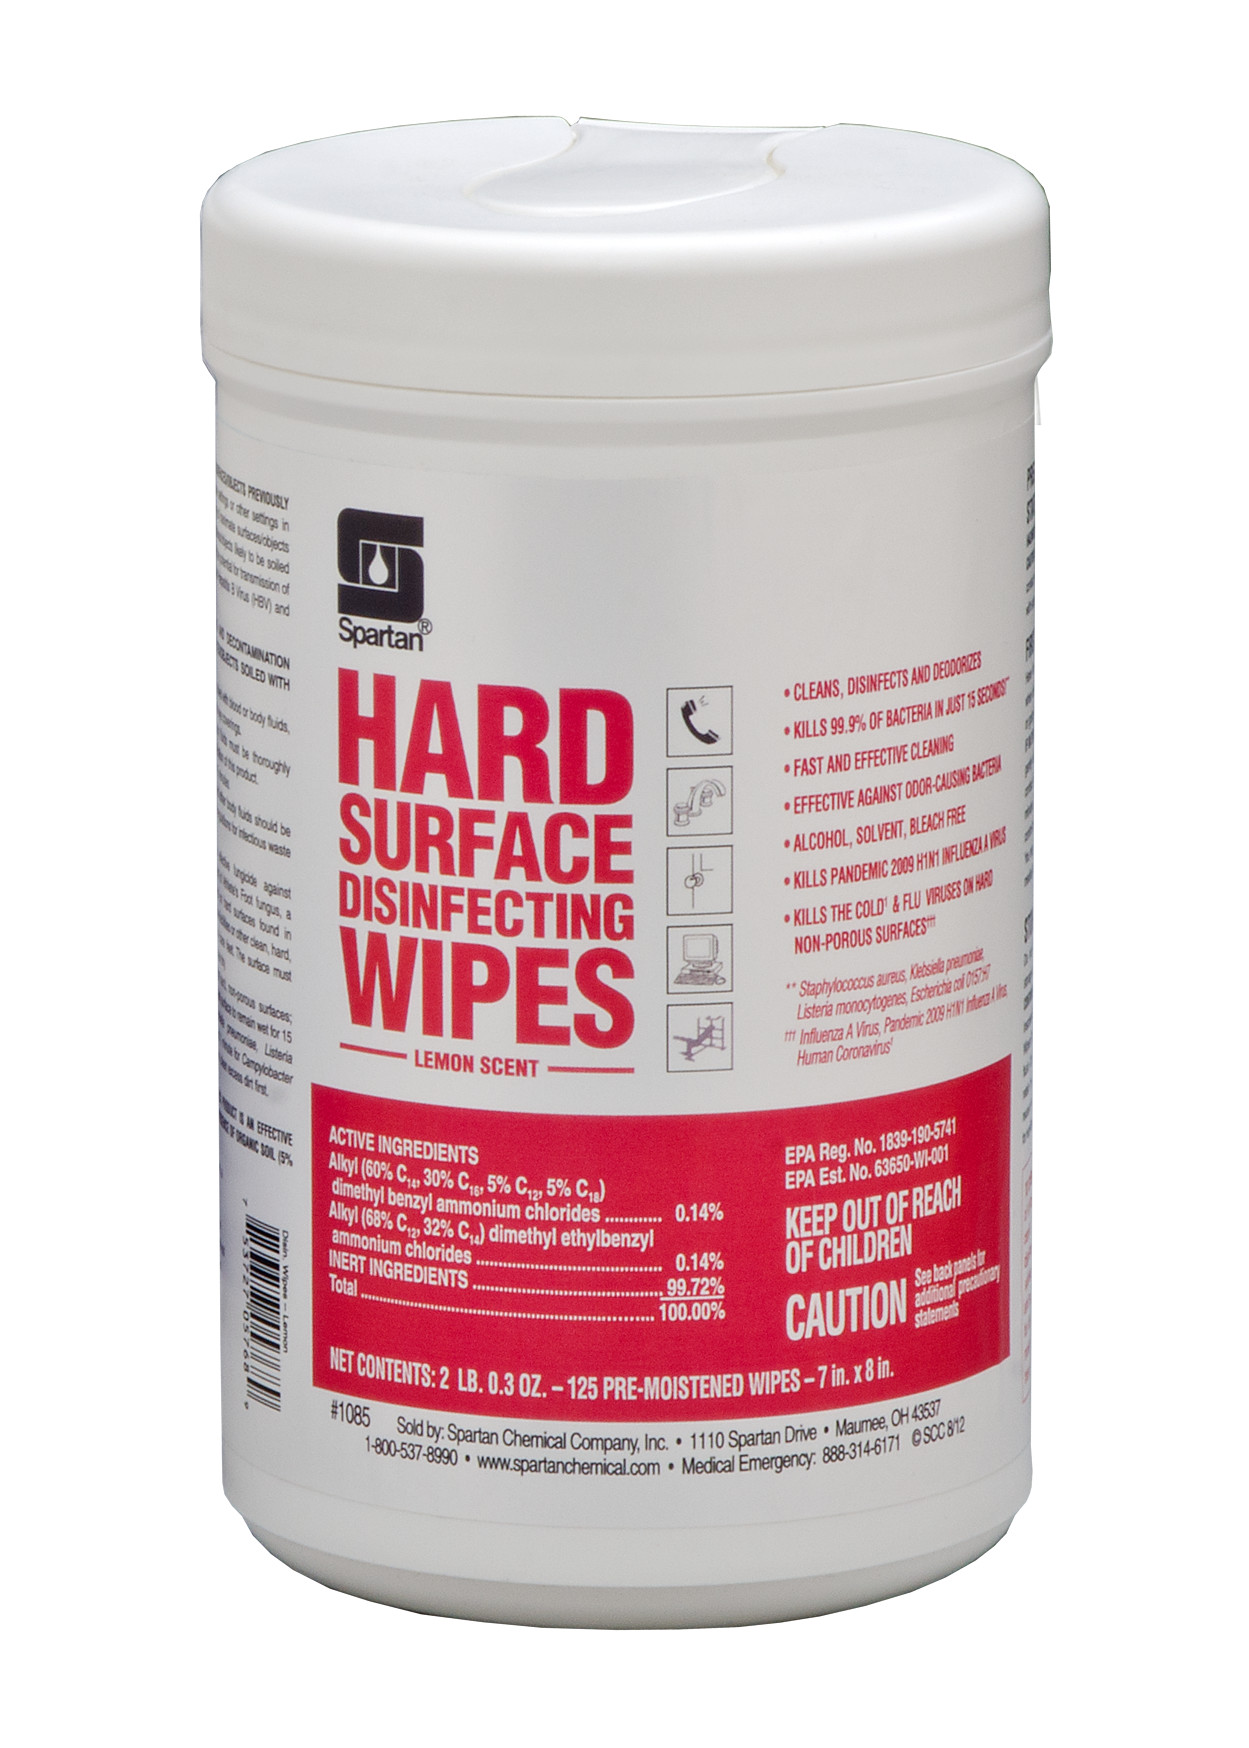 Hard+Surface+Disinfecting+Wipes+%28Lemon+Scent%29+%7B125+wipes+%286+per+case%29%7D